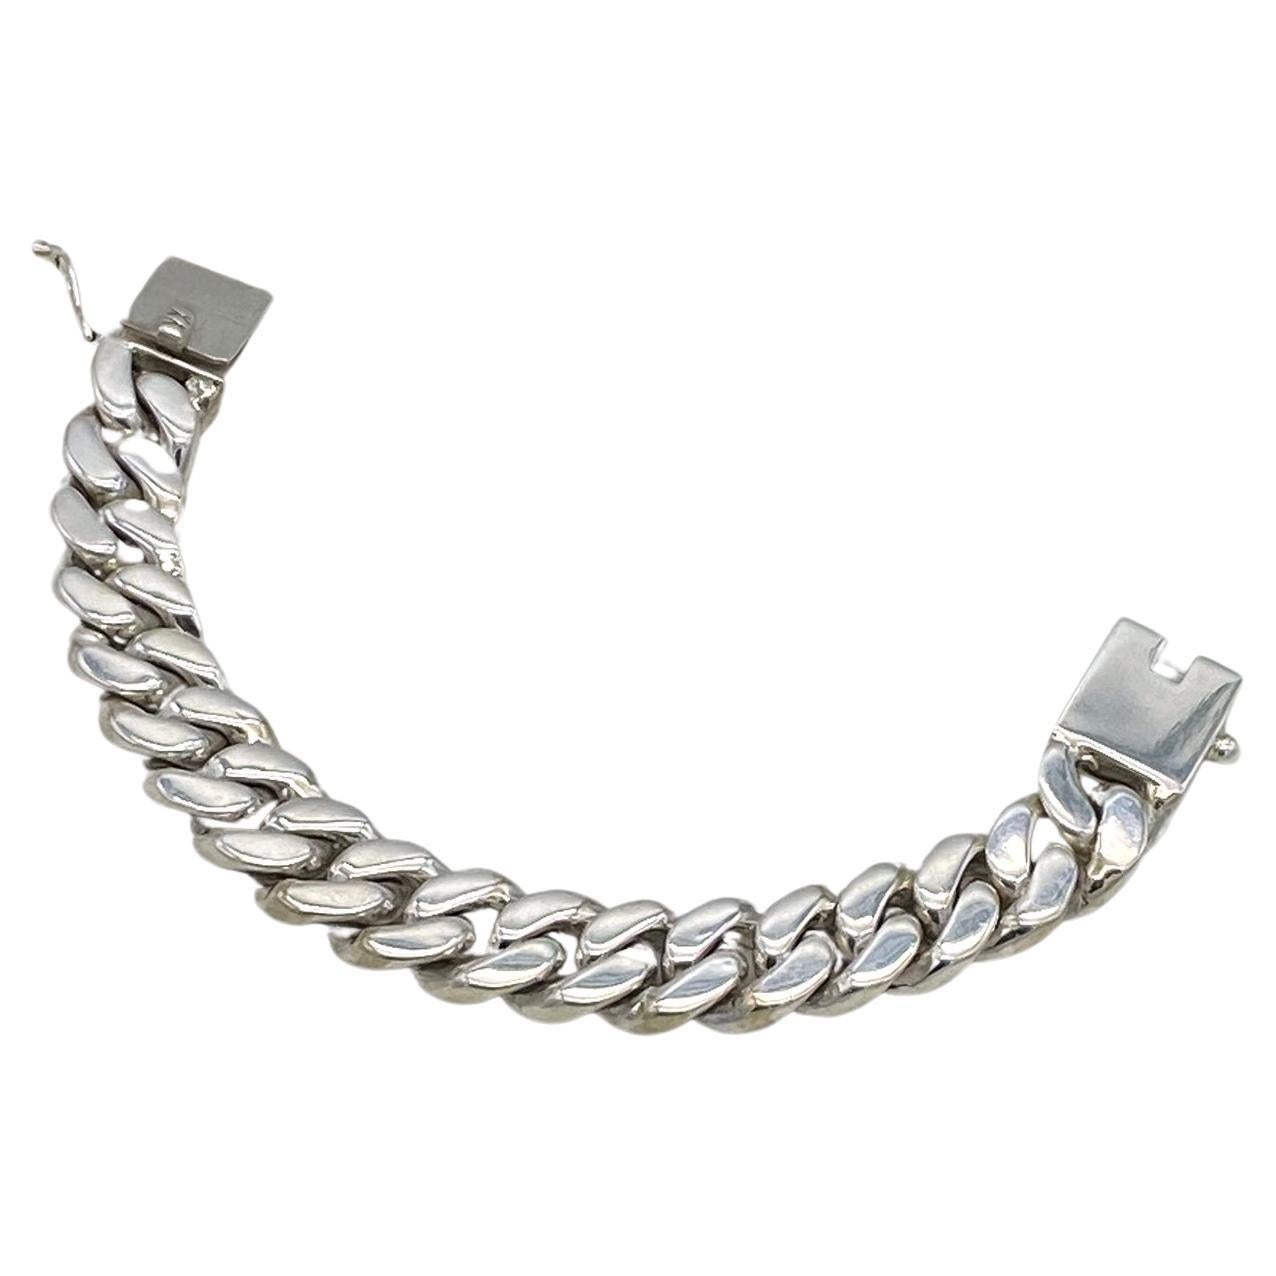 This is a solid sterling silver cuban link bracelet. It is over 111 grams with a polished sterling finish,
a square box clasp and an extra side security clasp. This cuban link bracelet was crafted by a Thai silver-smith. Perfect for men too!

Our